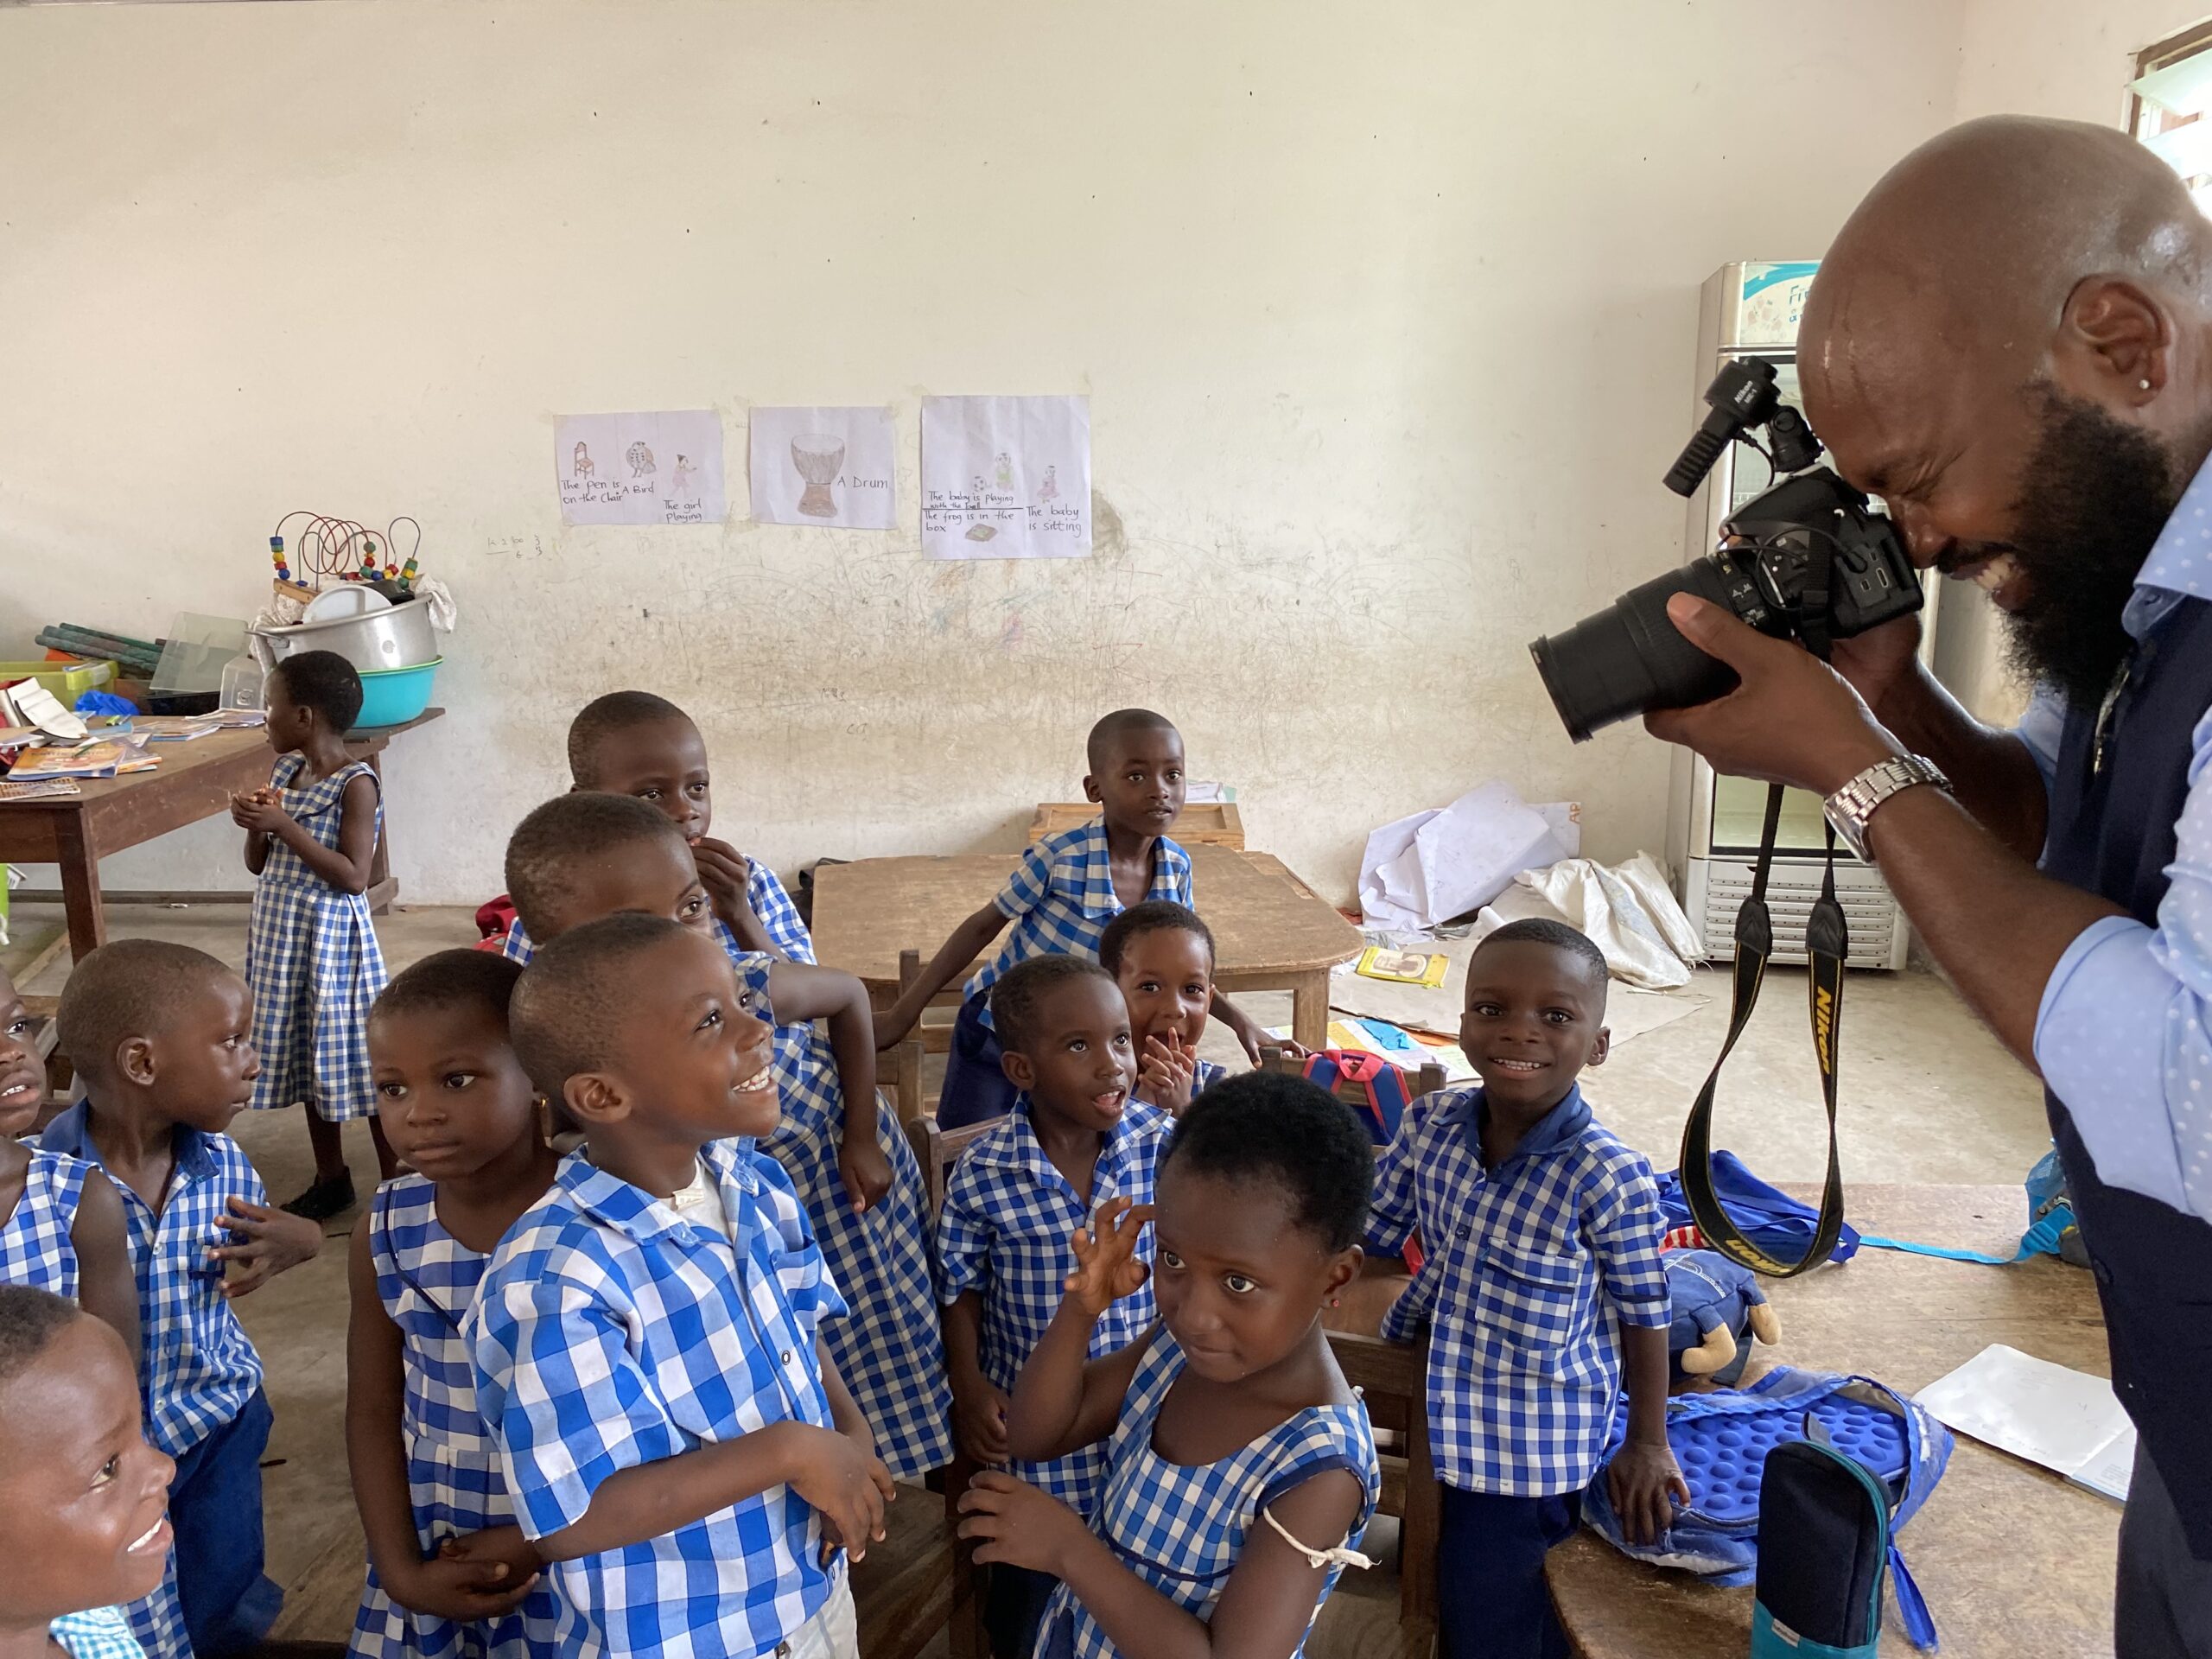 JOHN FOUNTAIN CAPTURES the faces of children at an orphanage in Ghana, where he was a 2021-22 Fulbright scholar. (Photo: Monica Fountain)